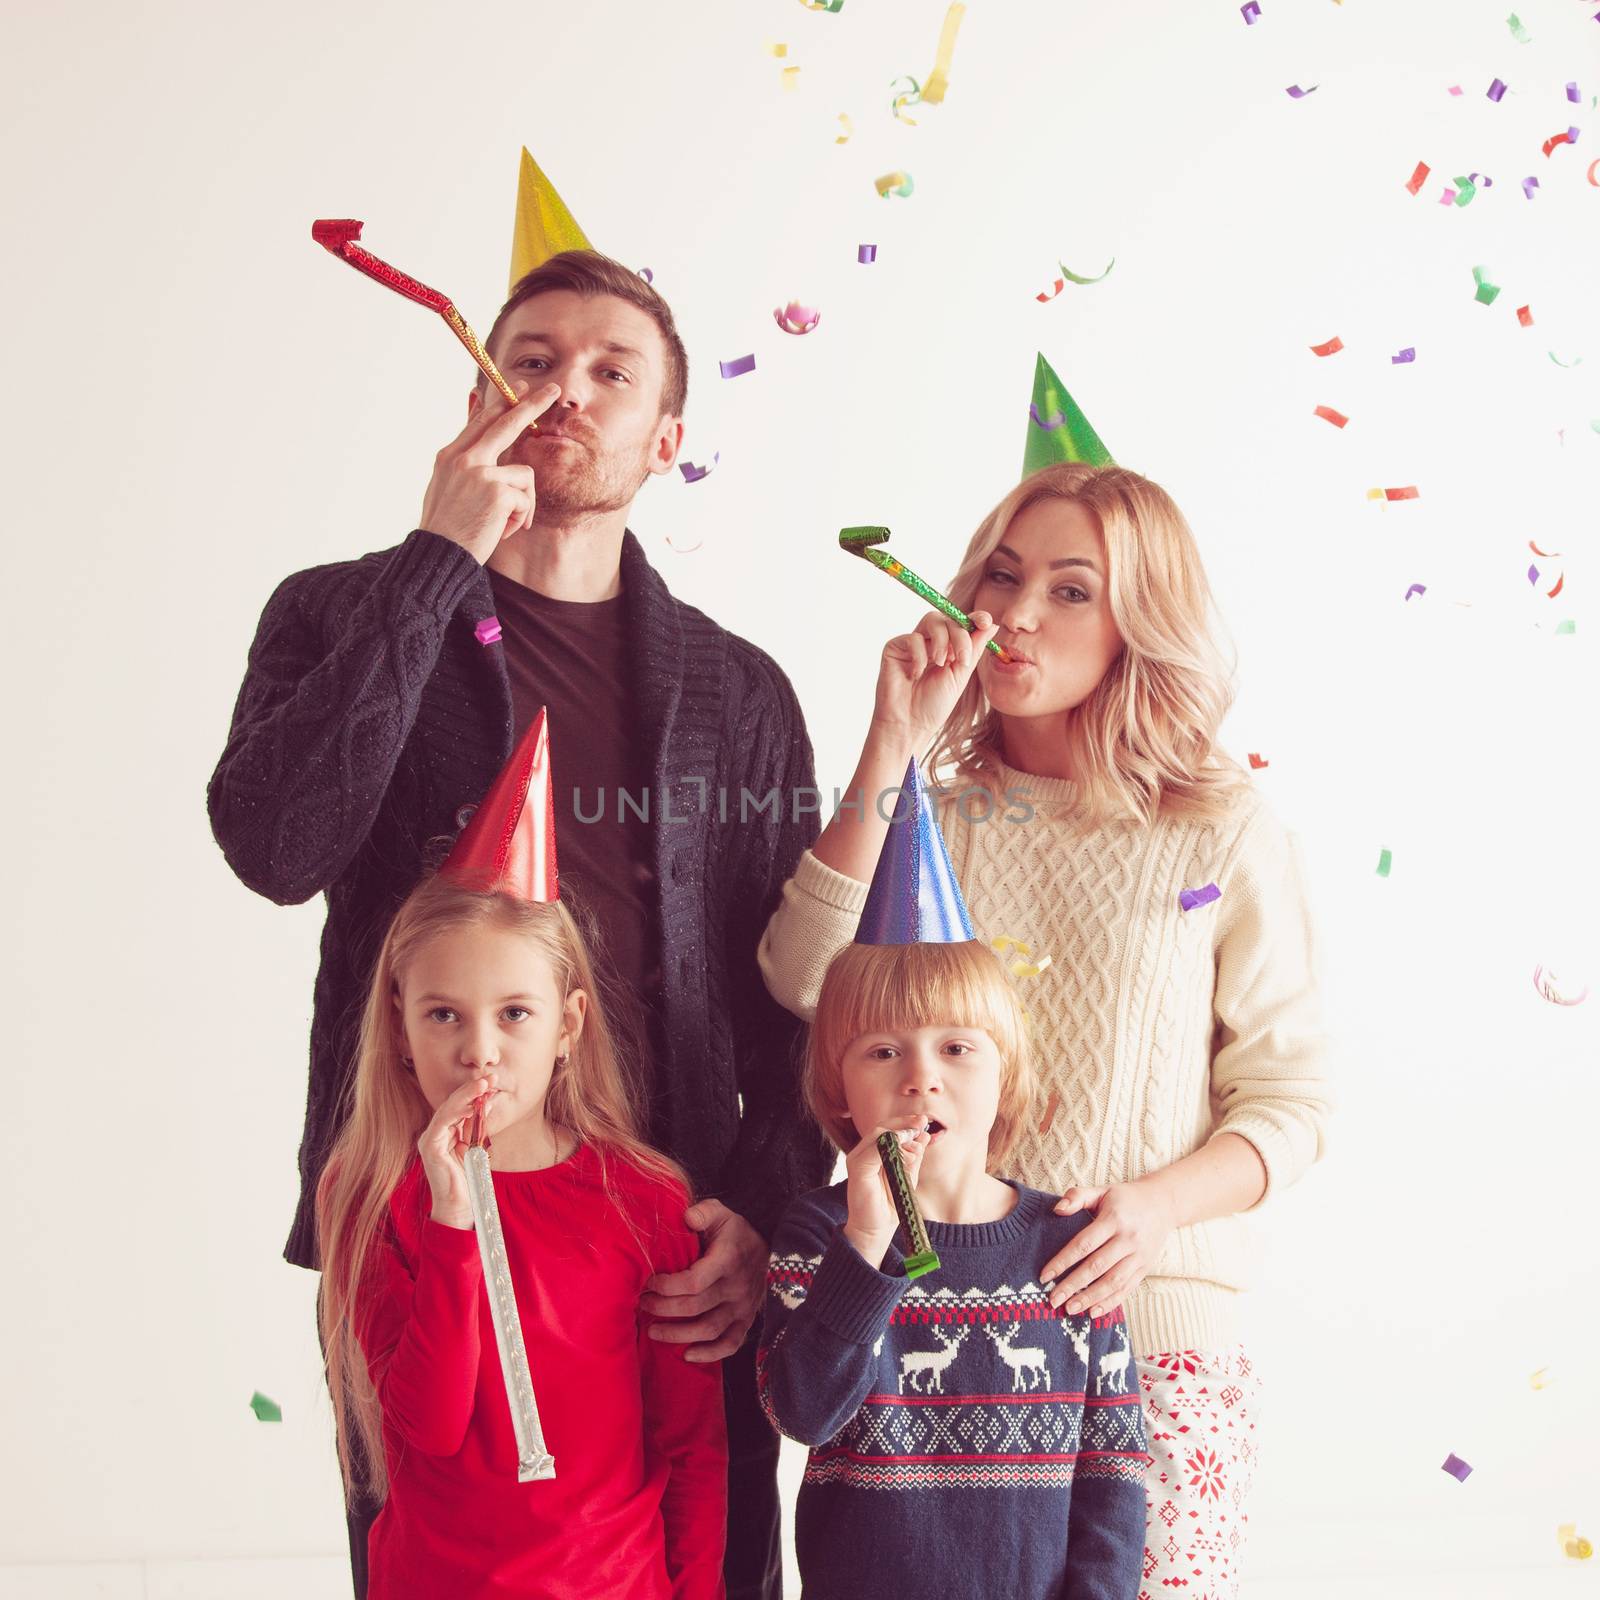 Family blowing party trumpets with confetti celebrating new year